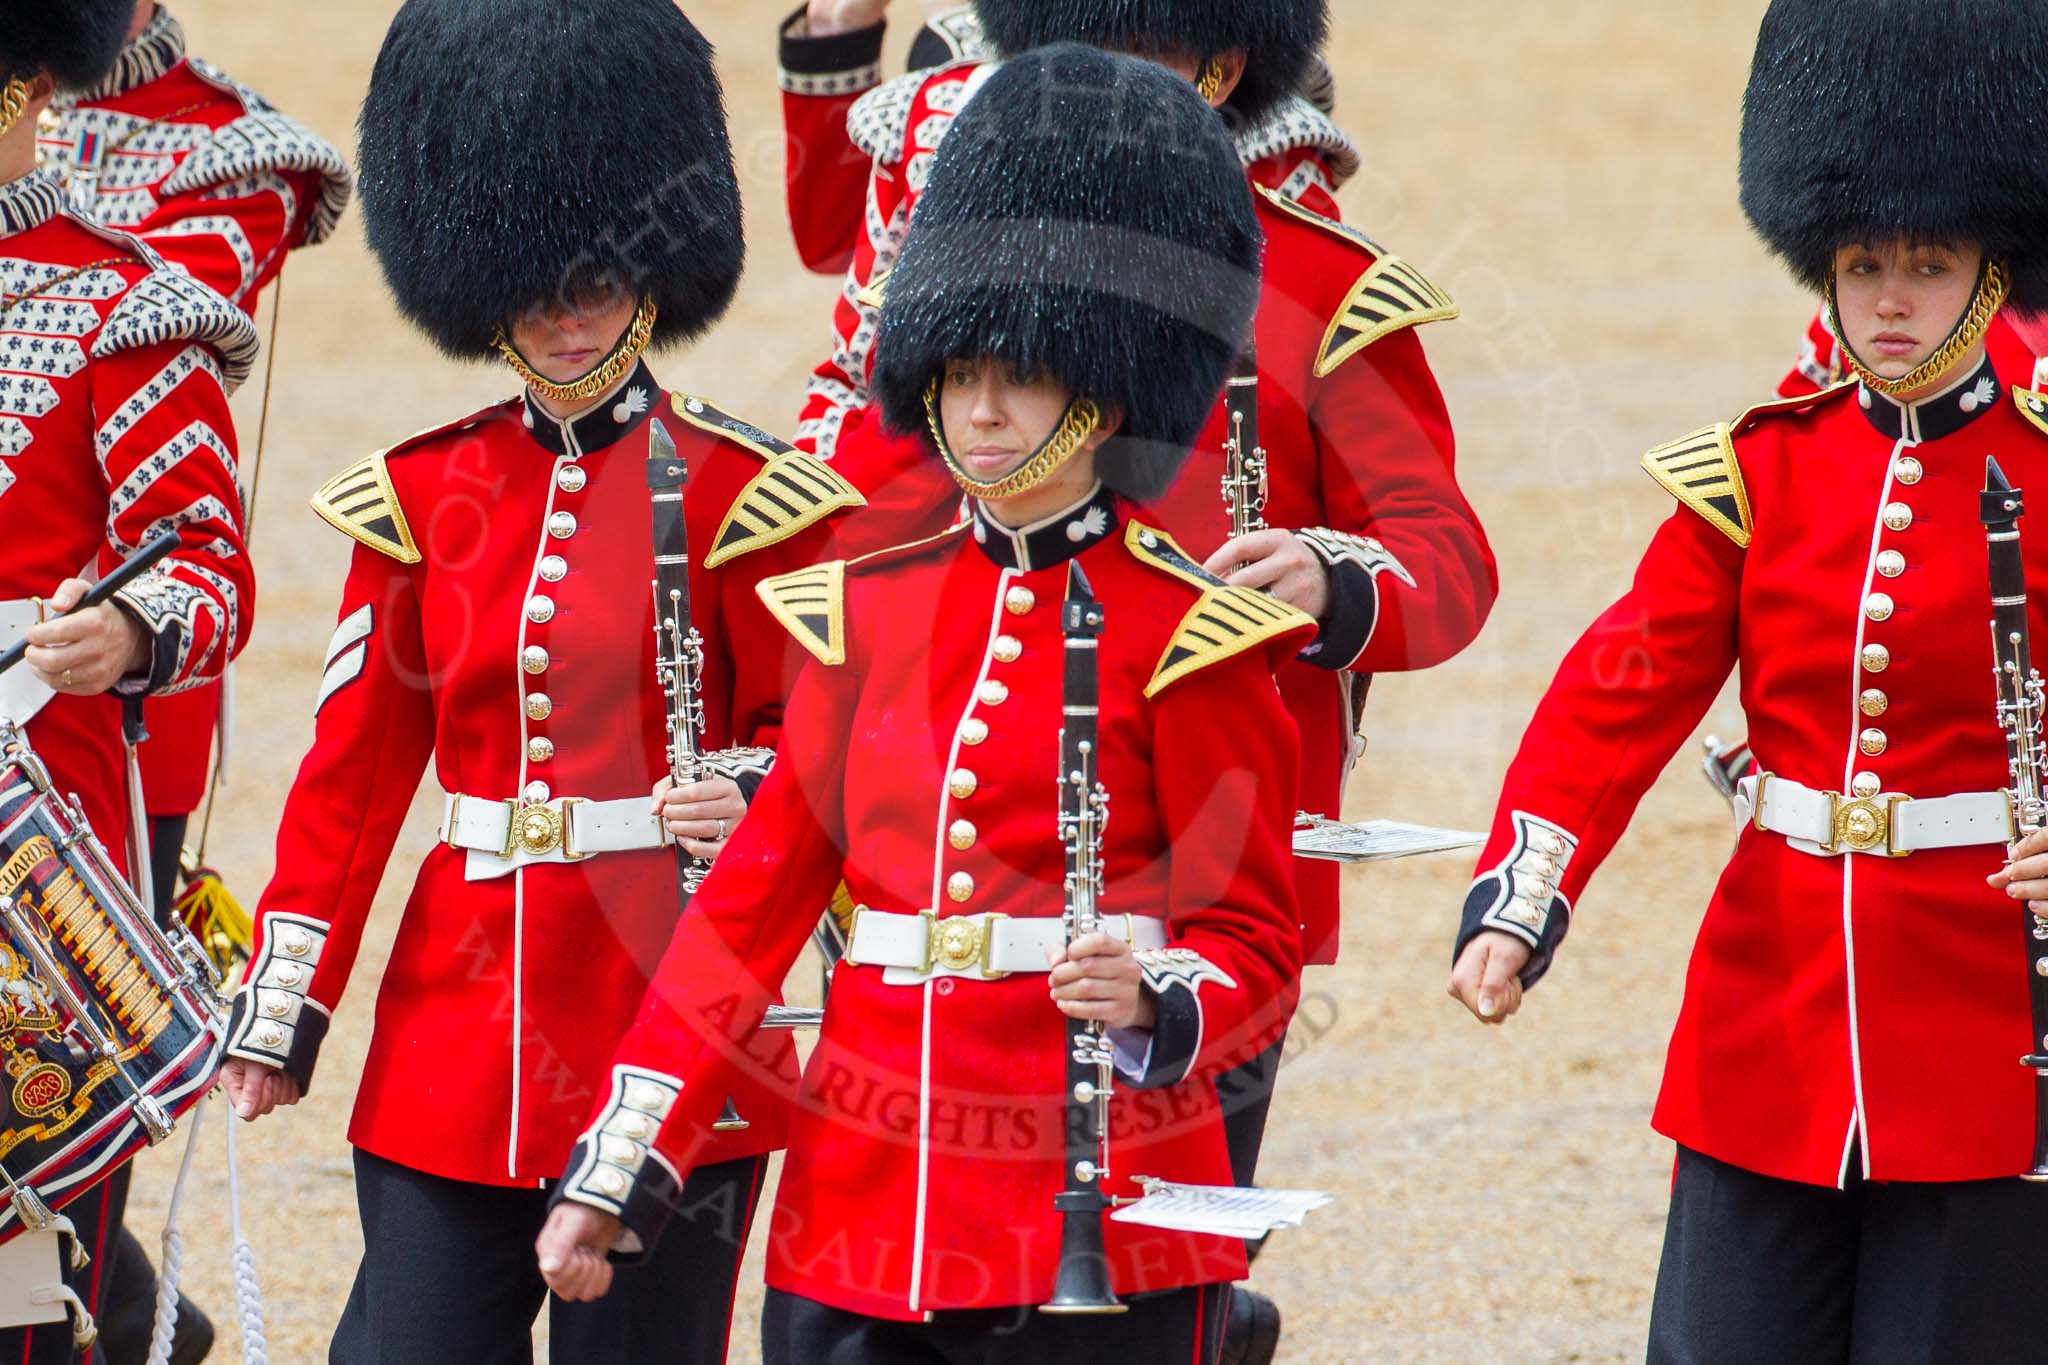 The Colonel's Review 2014.
Horse Guards Parade, Westminster,
London,

United Kingdom,
on 07 June 2014 at 11:50, image #583